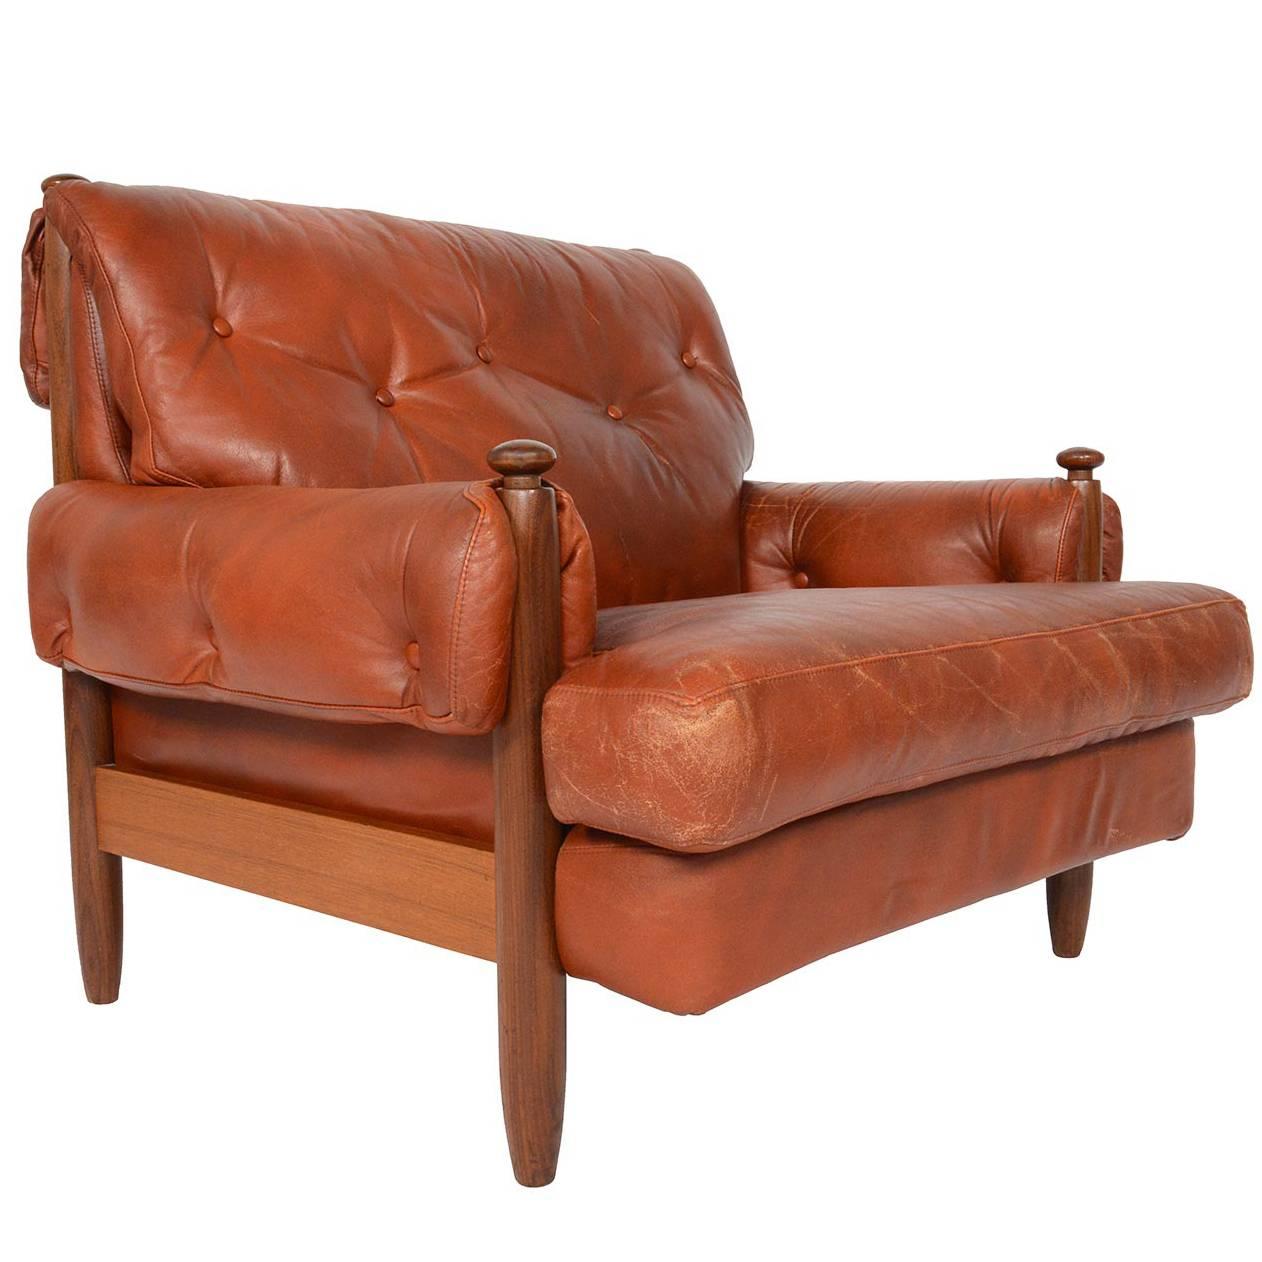 Walnut and Leather Brazilian Style Lounge Chair